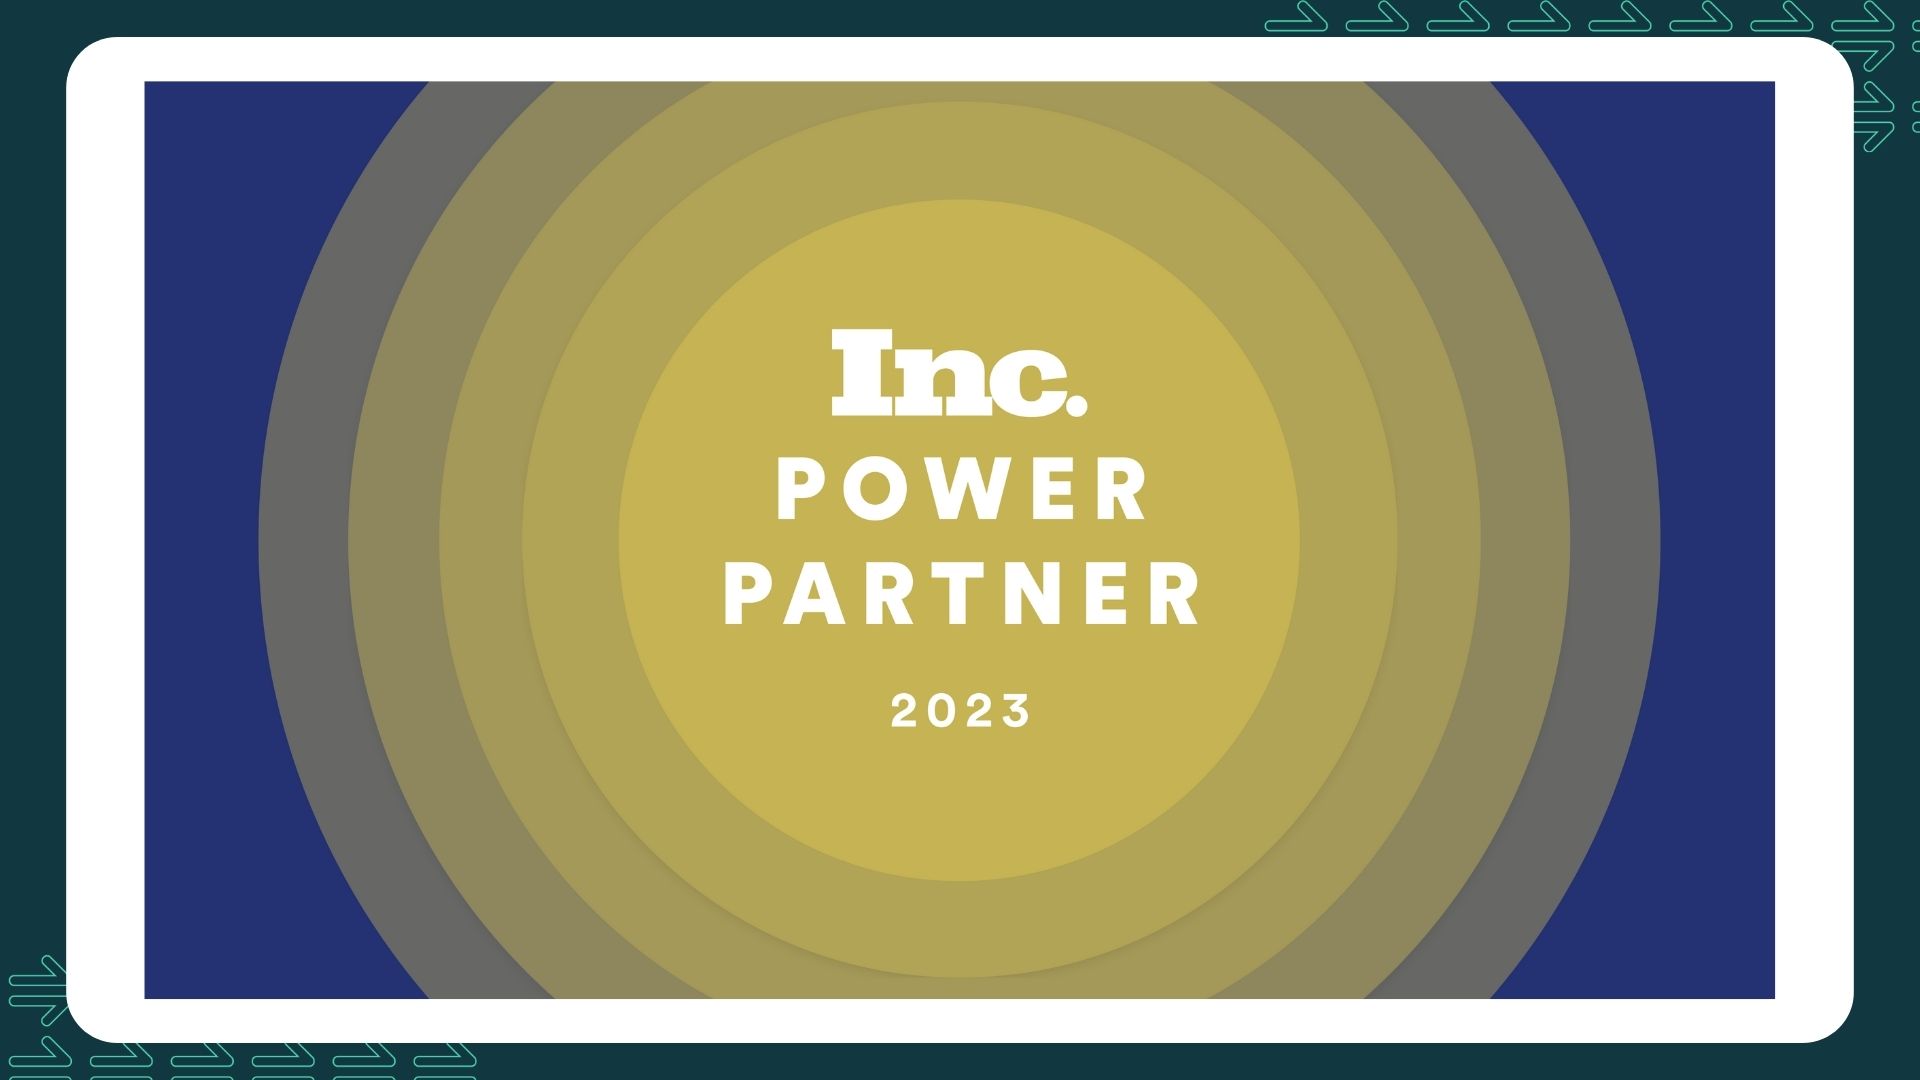 Forward Financing Named to Inc.’s Second Annual Power Partner Awards